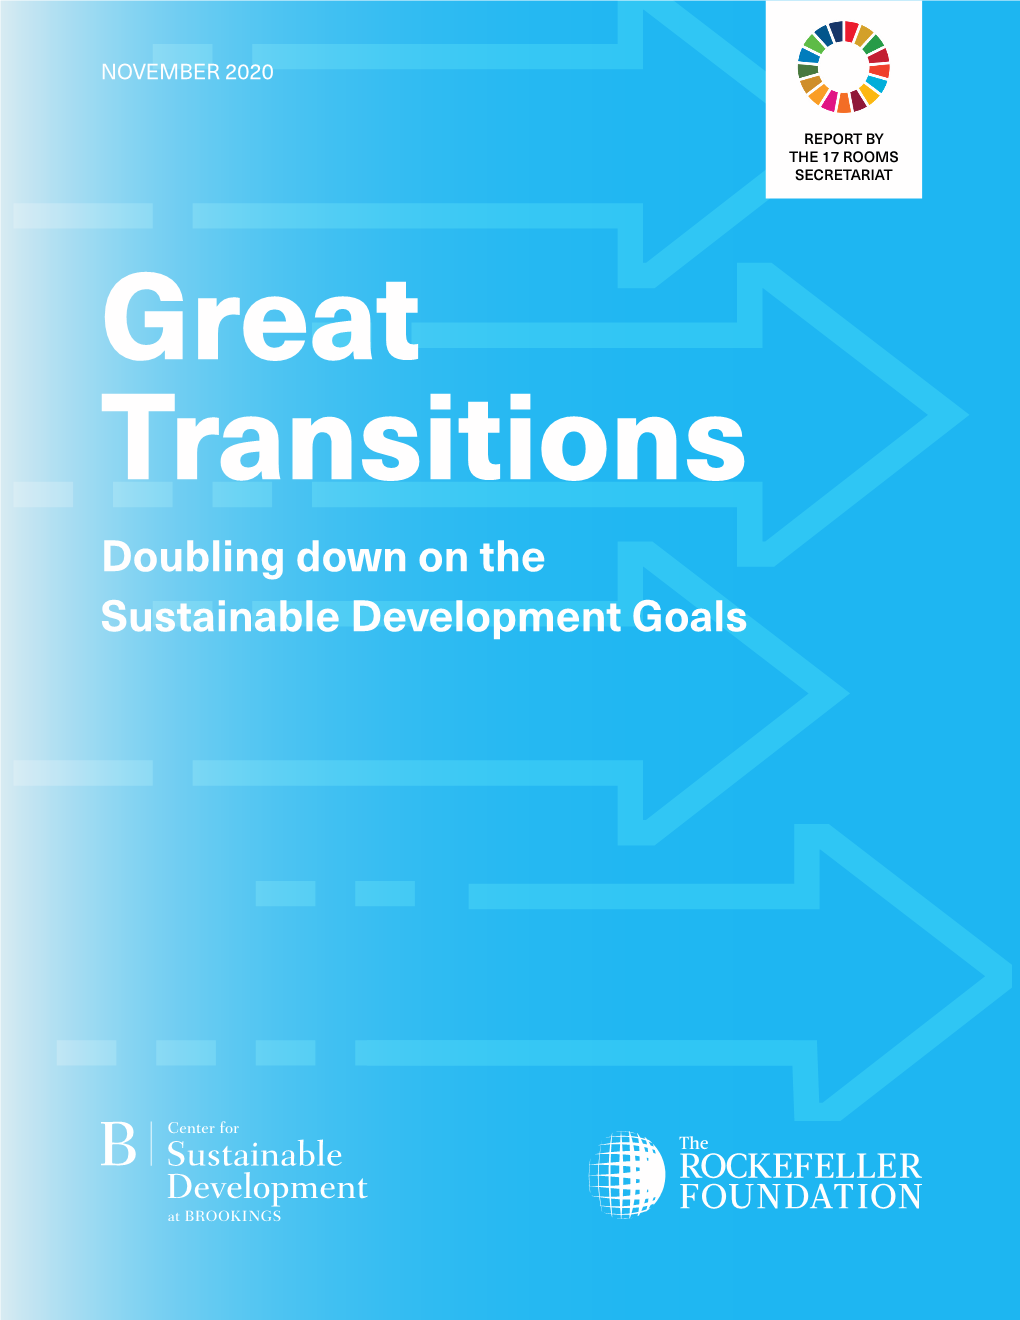 Great Transitions: Doubling Down on the Sustainable Development Goals